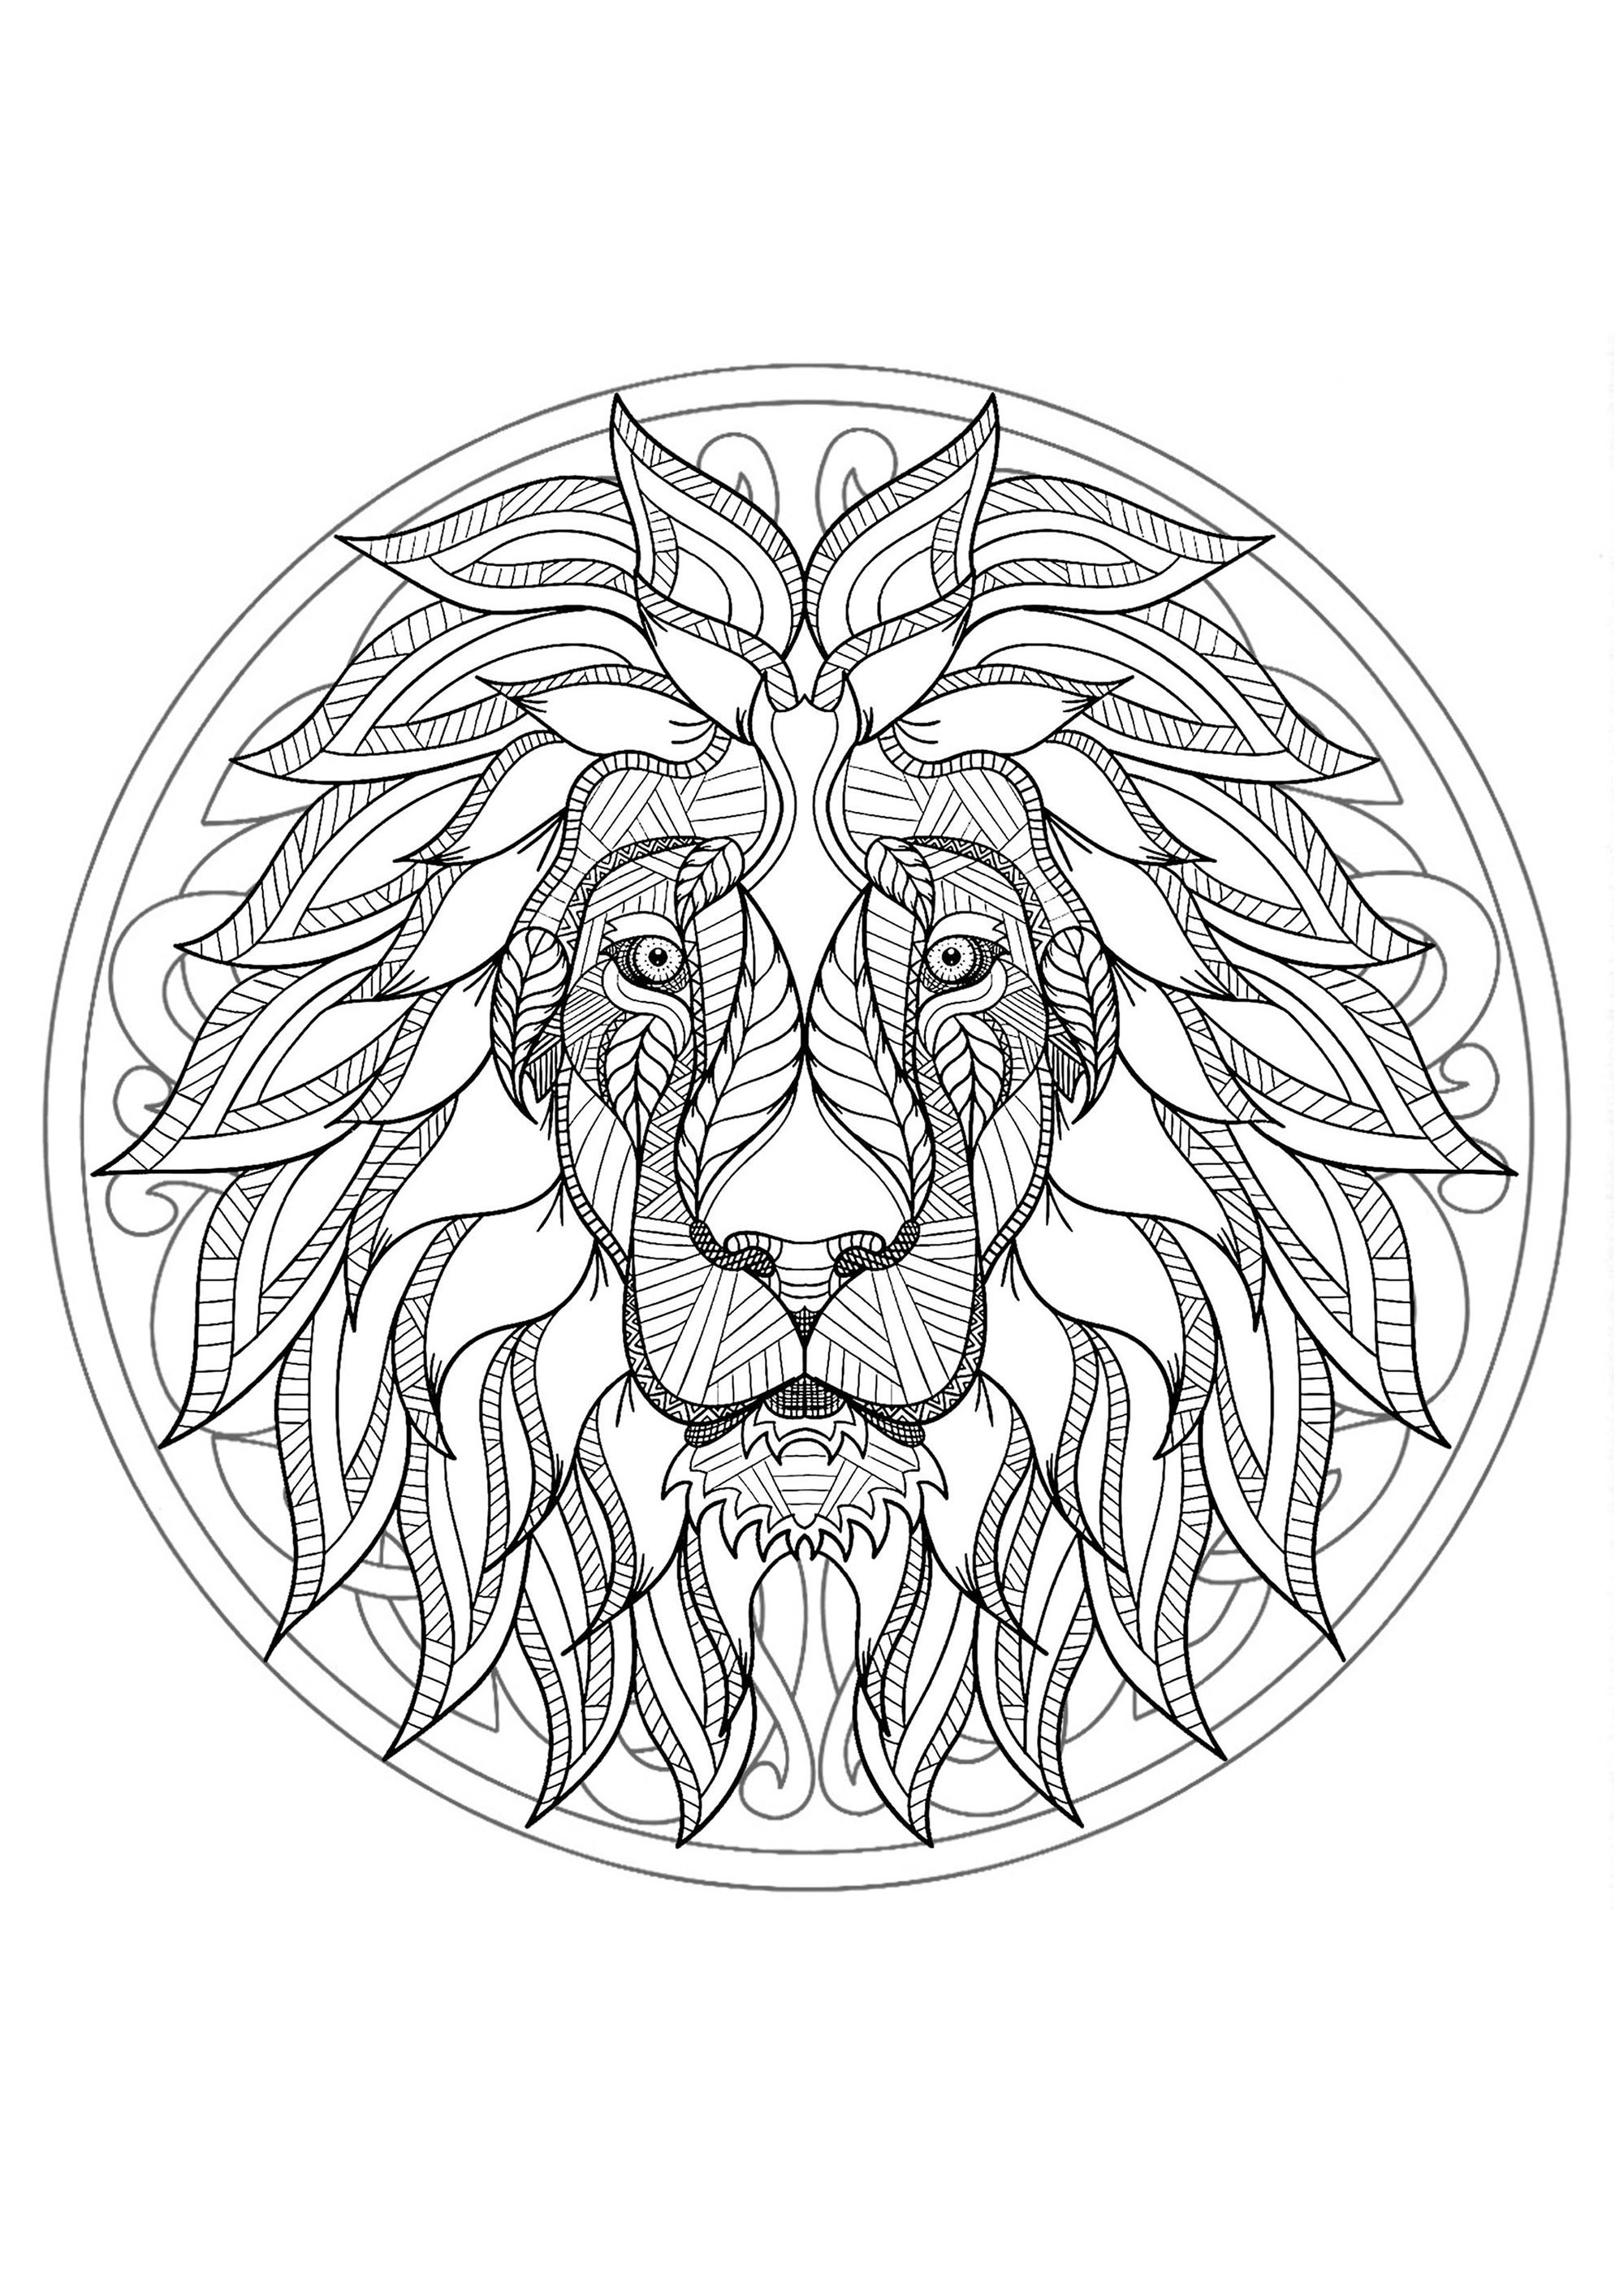 Simple Mandalas coloring page to download for free